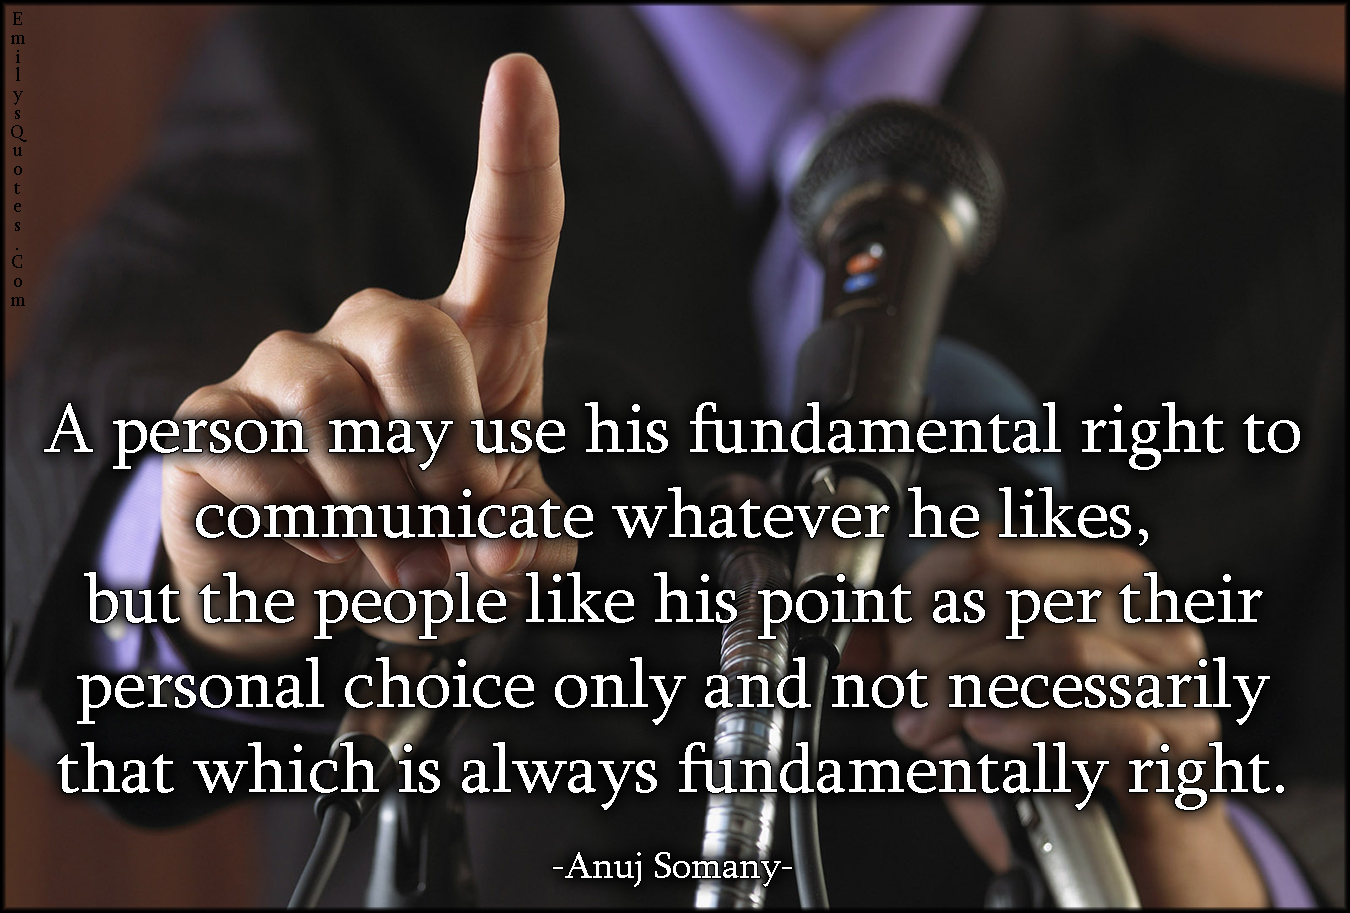 A person may use his fundamental right to communicate whatever he likes, but the people like his point as per their personal choice only and not necessarily that which is always fundamentally right